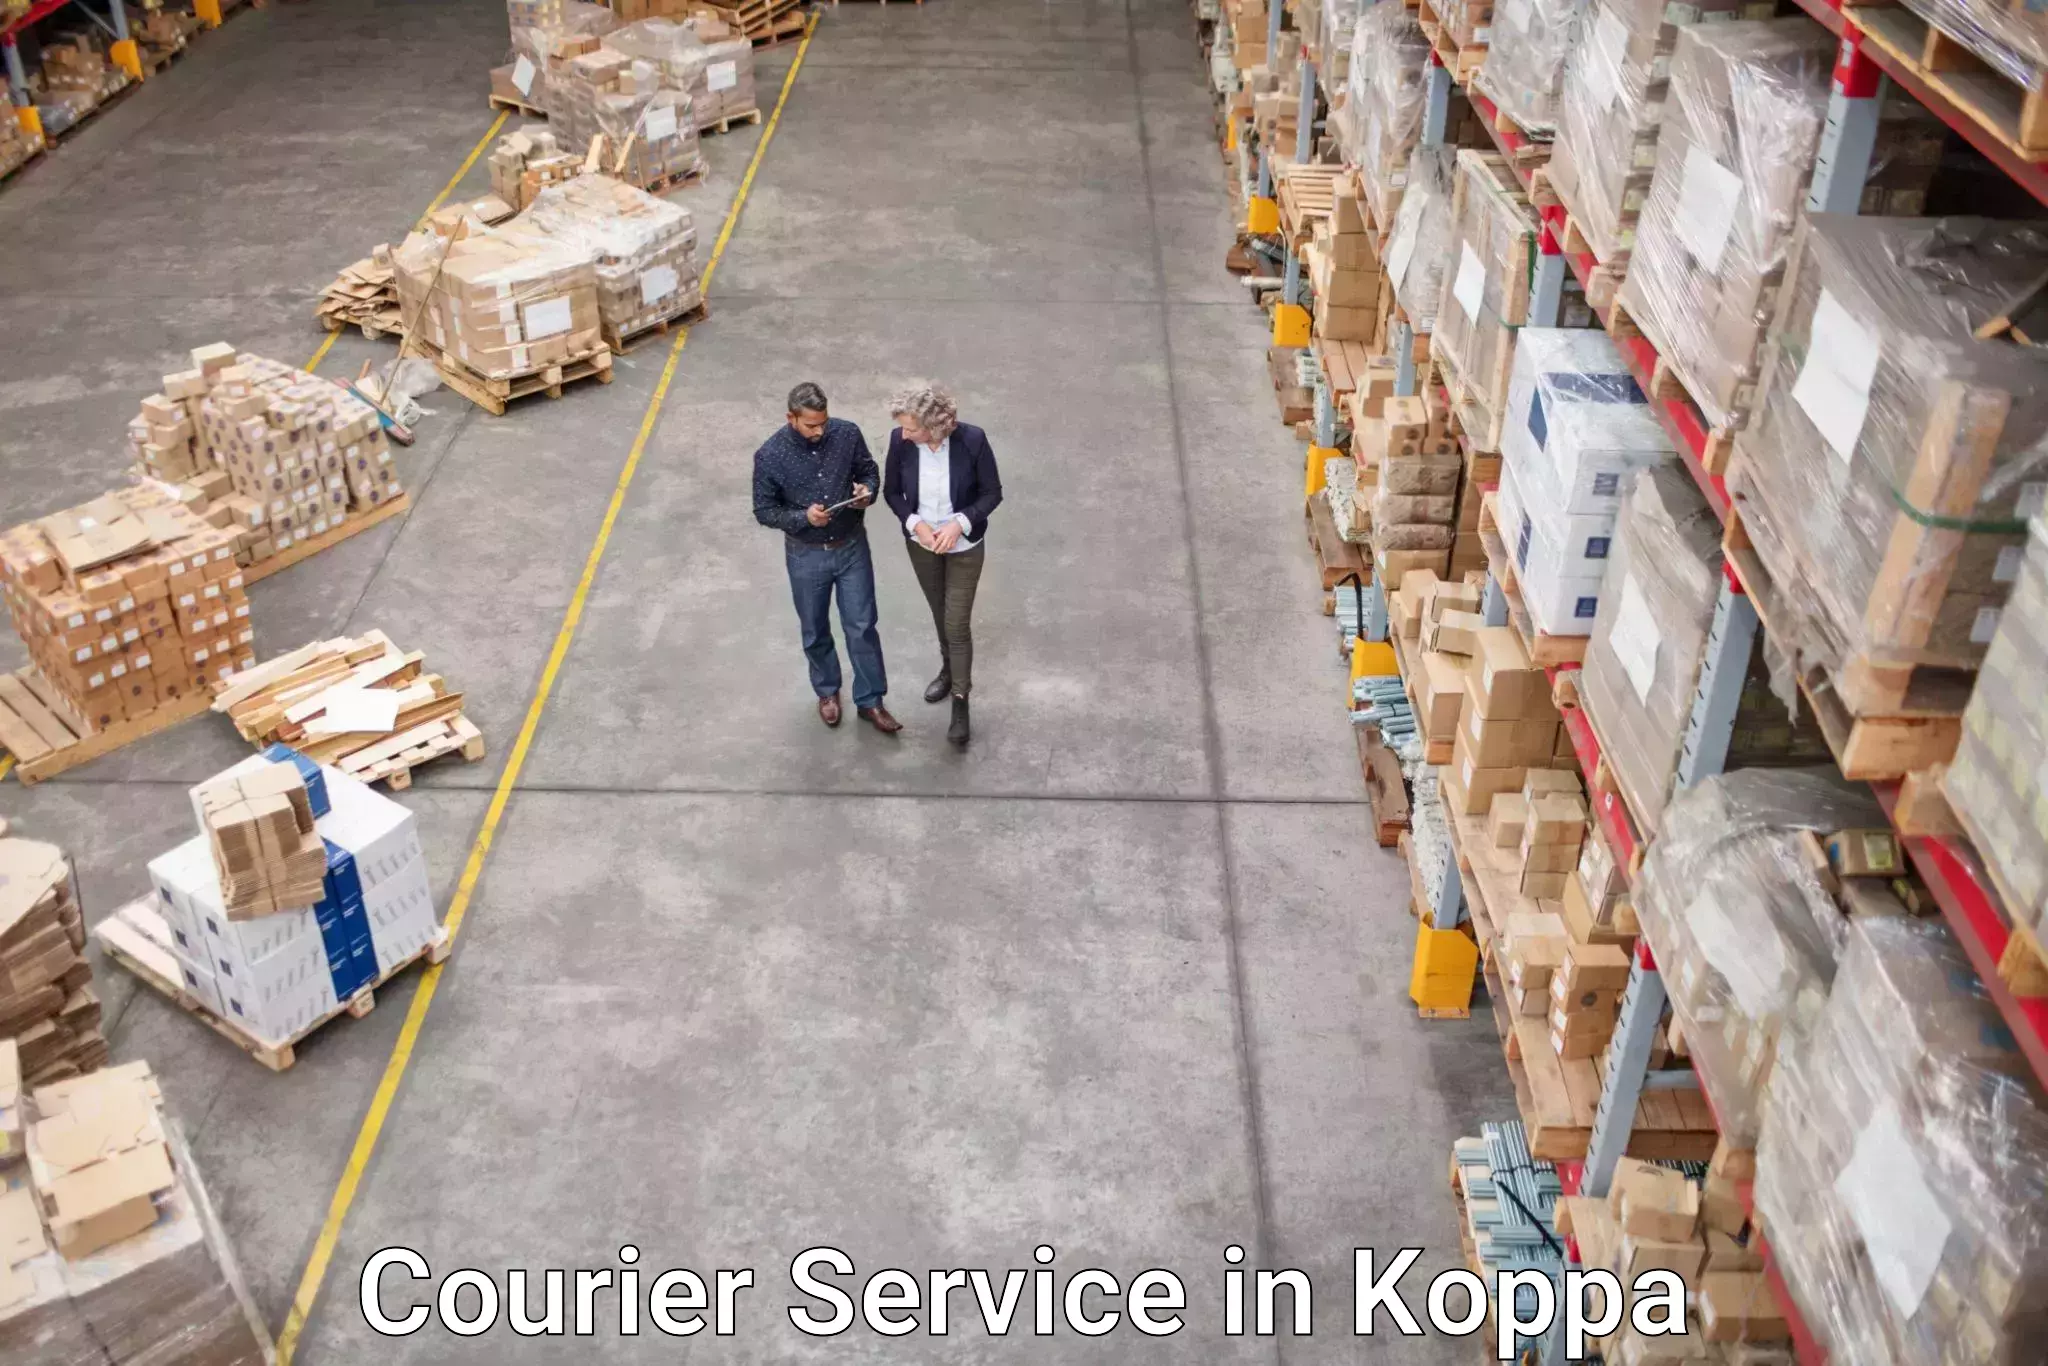 Expedited parcel delivery in Koppa